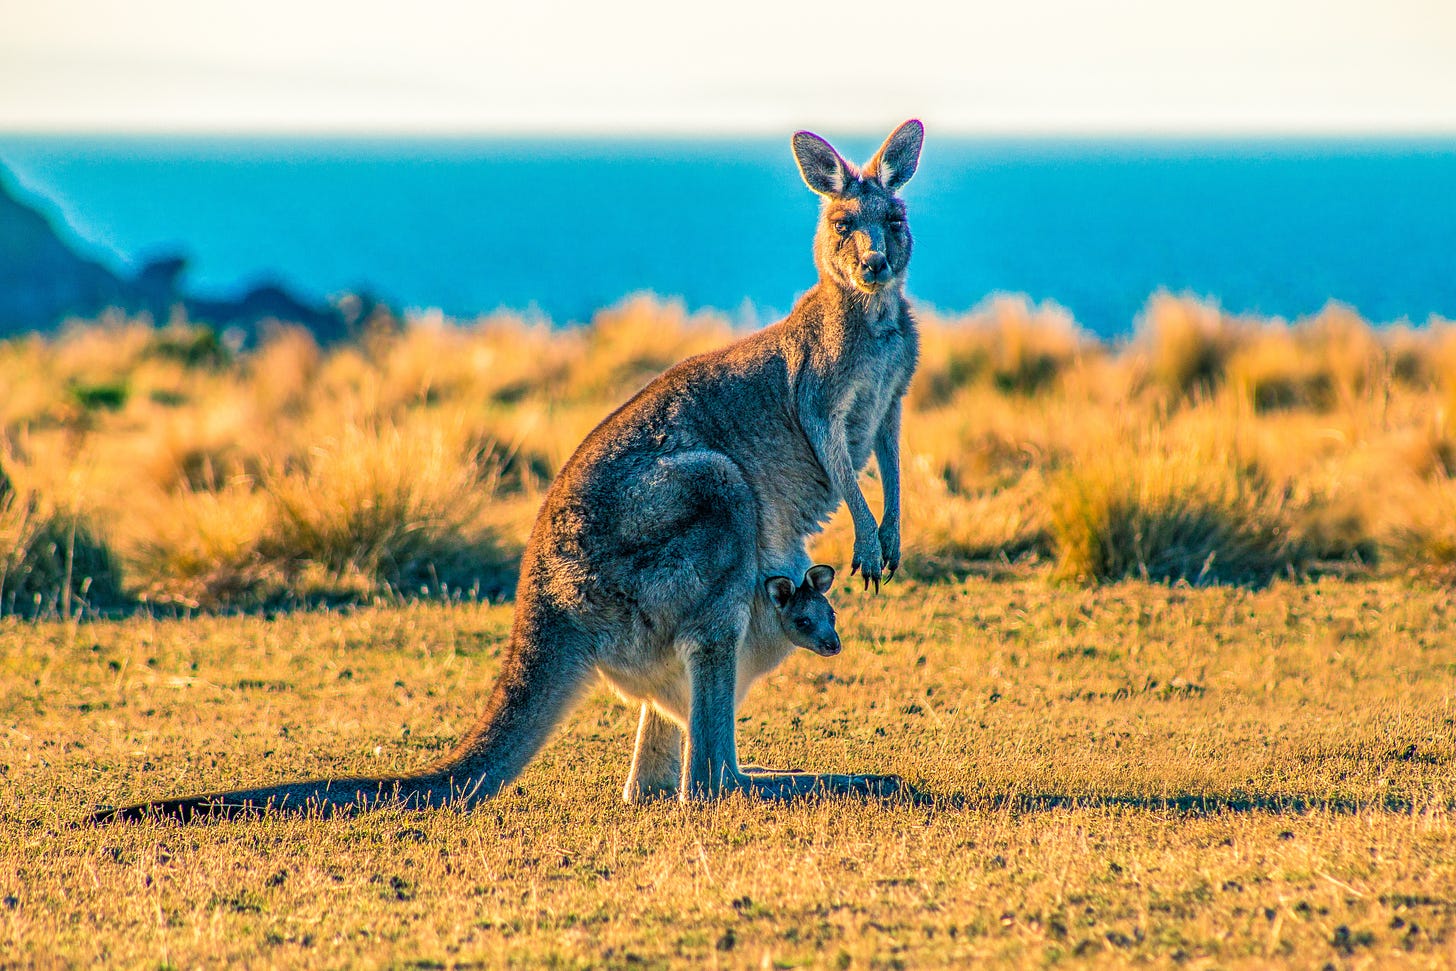 Kangaroo's are native to the region of North Queensland, Australia. Home of the people who speak Guugu Yimithirr.